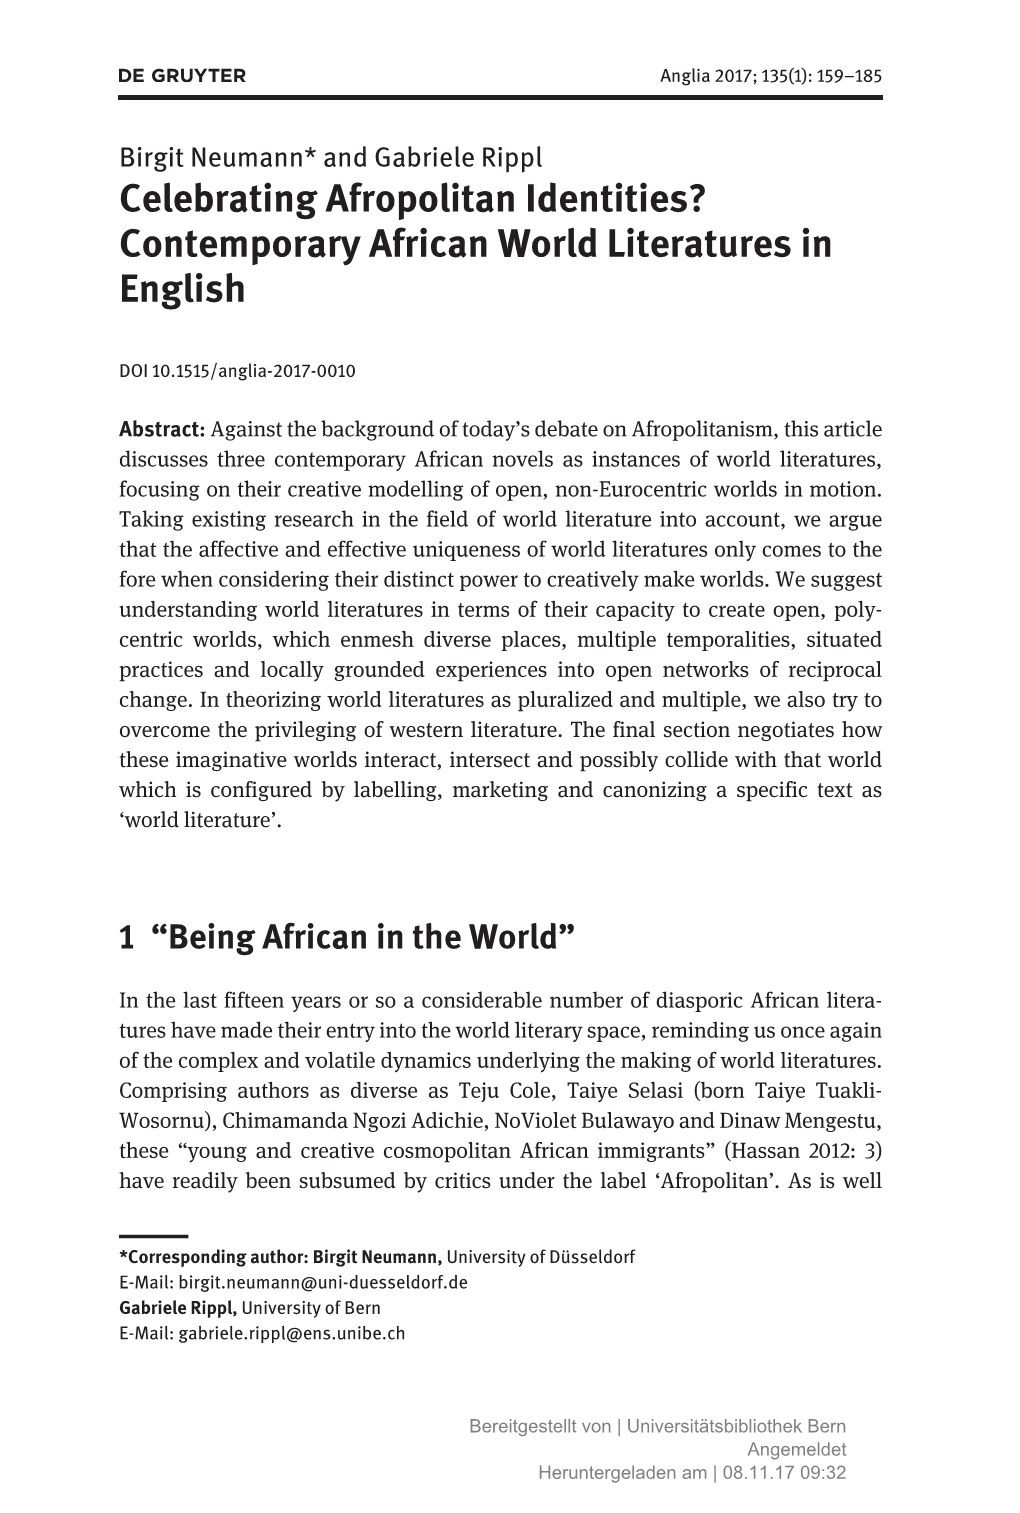 Celebrating Afropolitan Identities? Contemporary African World Literatures in English